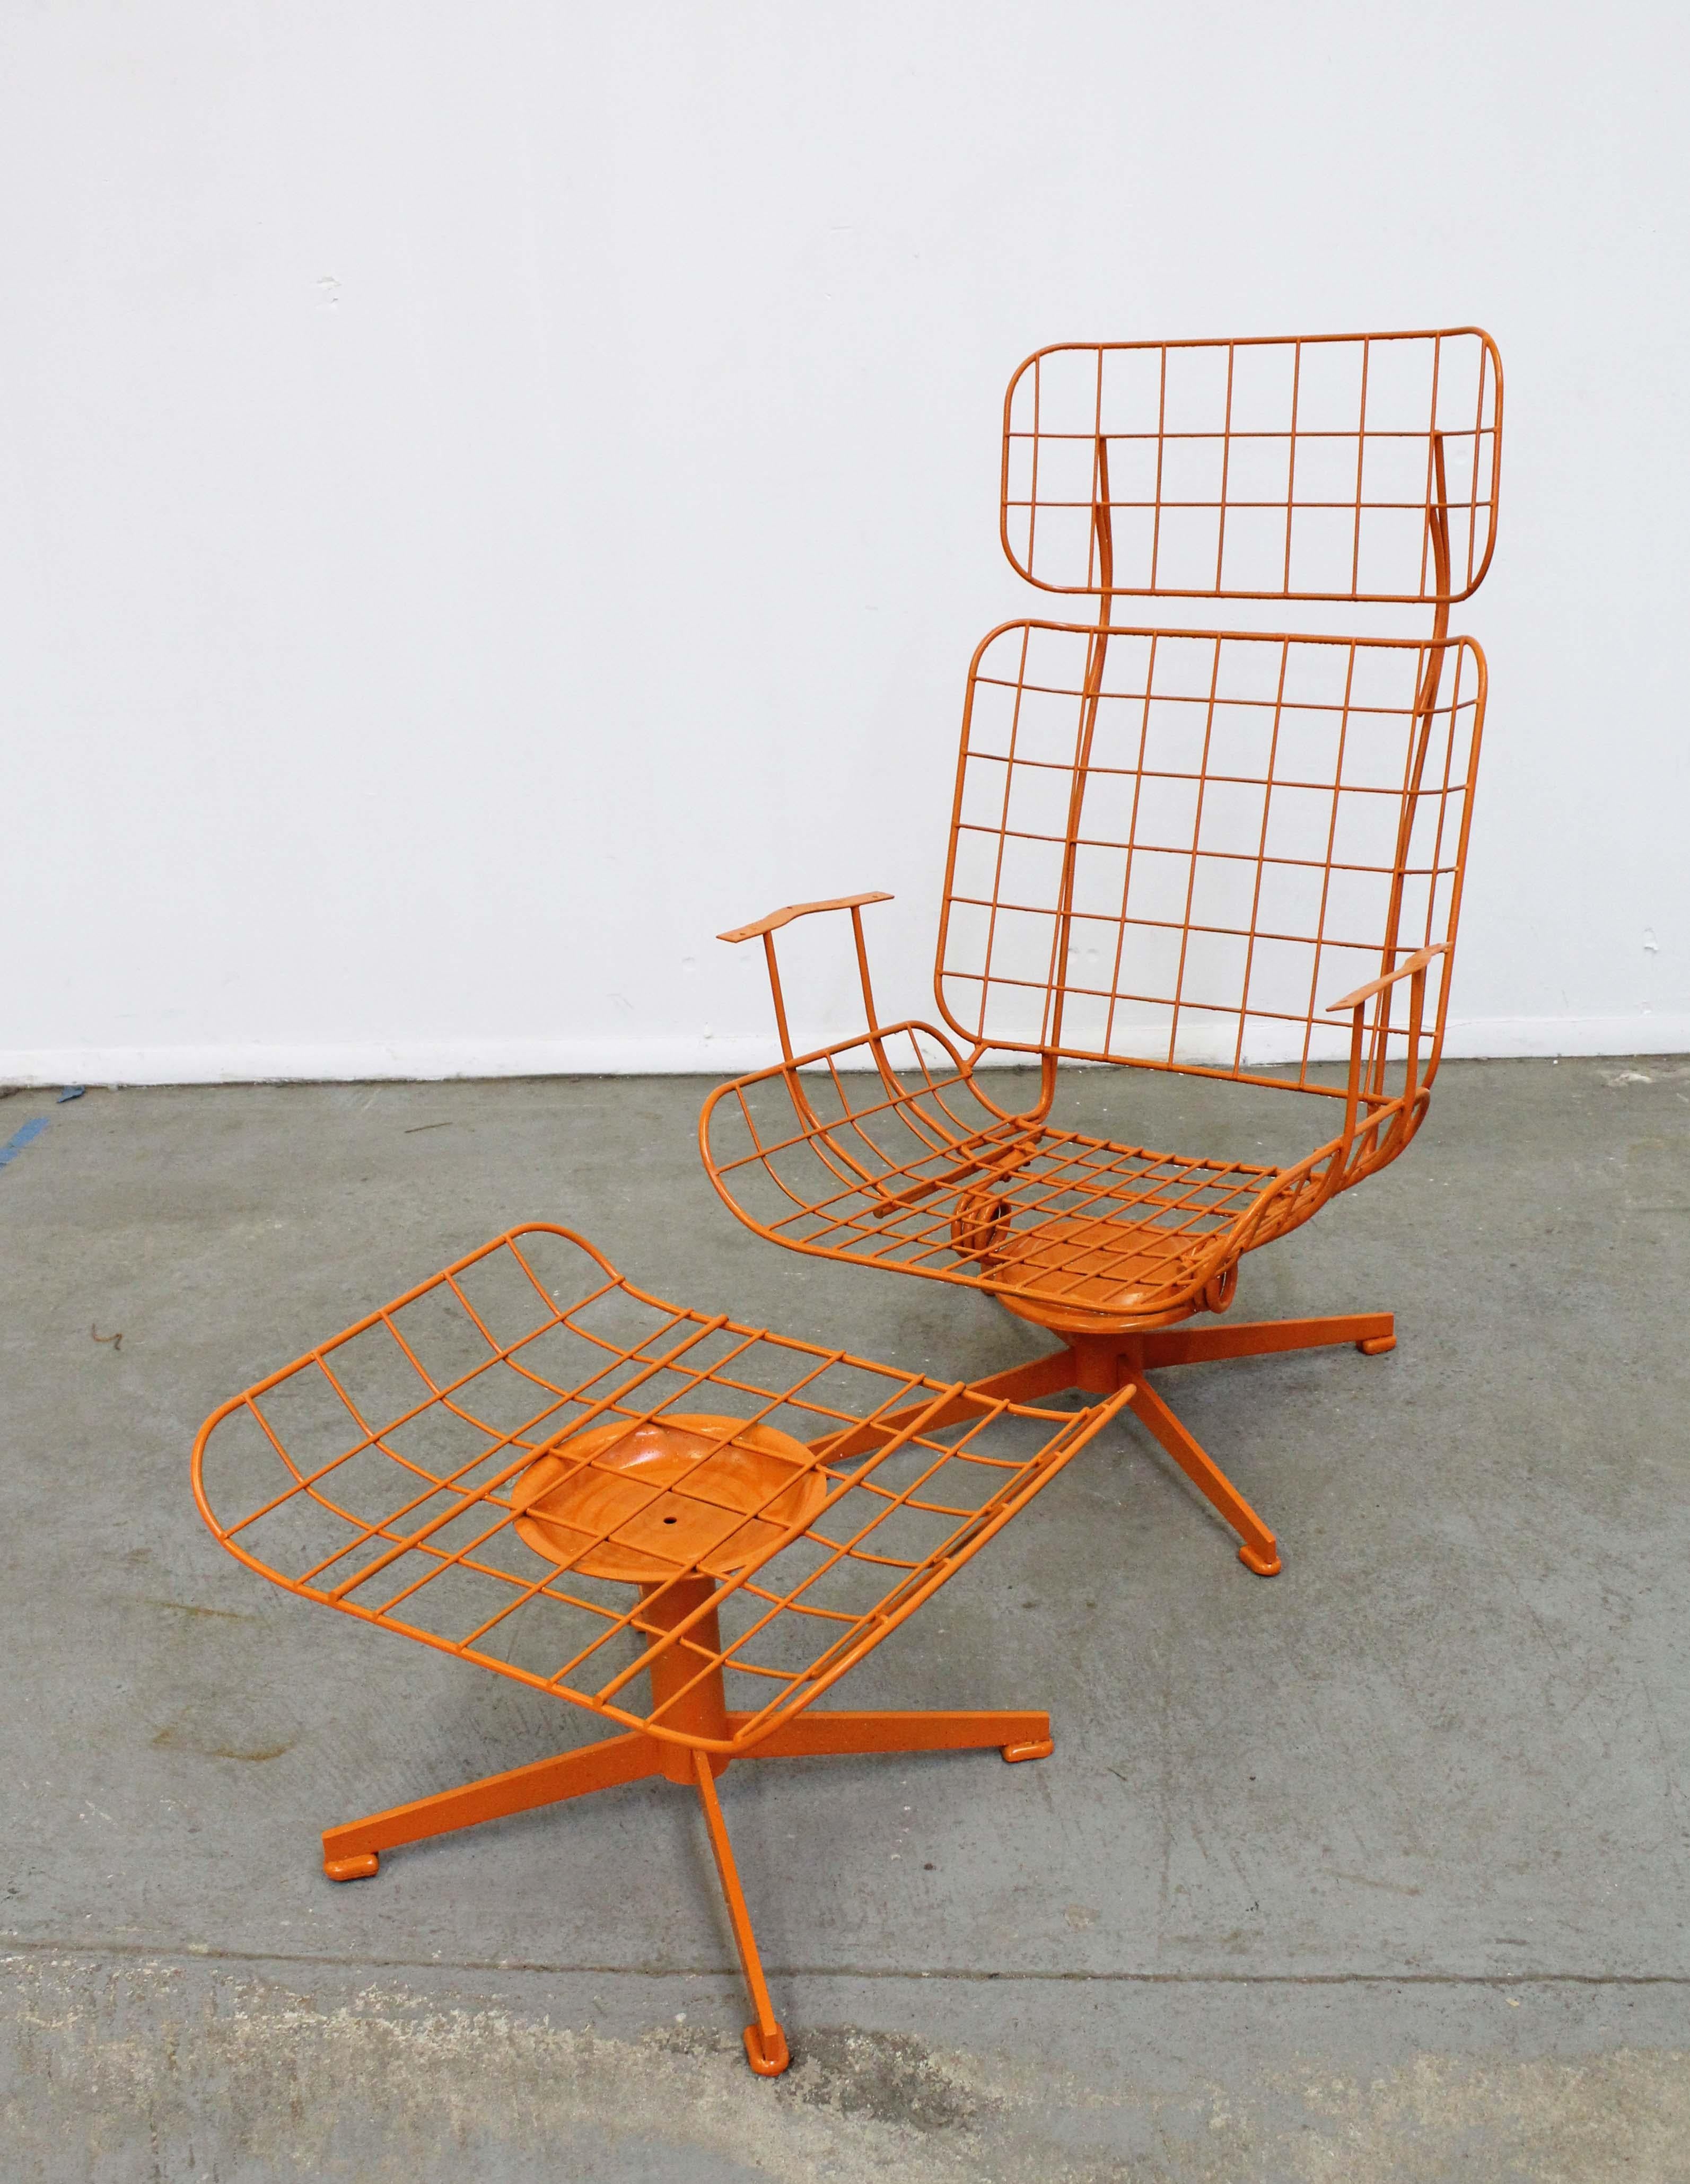 What a find. Offered is a midcentury welded steel outdoor/patio lounge chair & ottoman made by Homecrest Bottemiller. This piece has been repainted in an atomic orange. It is in good condition considering its age with minor age wear (has been